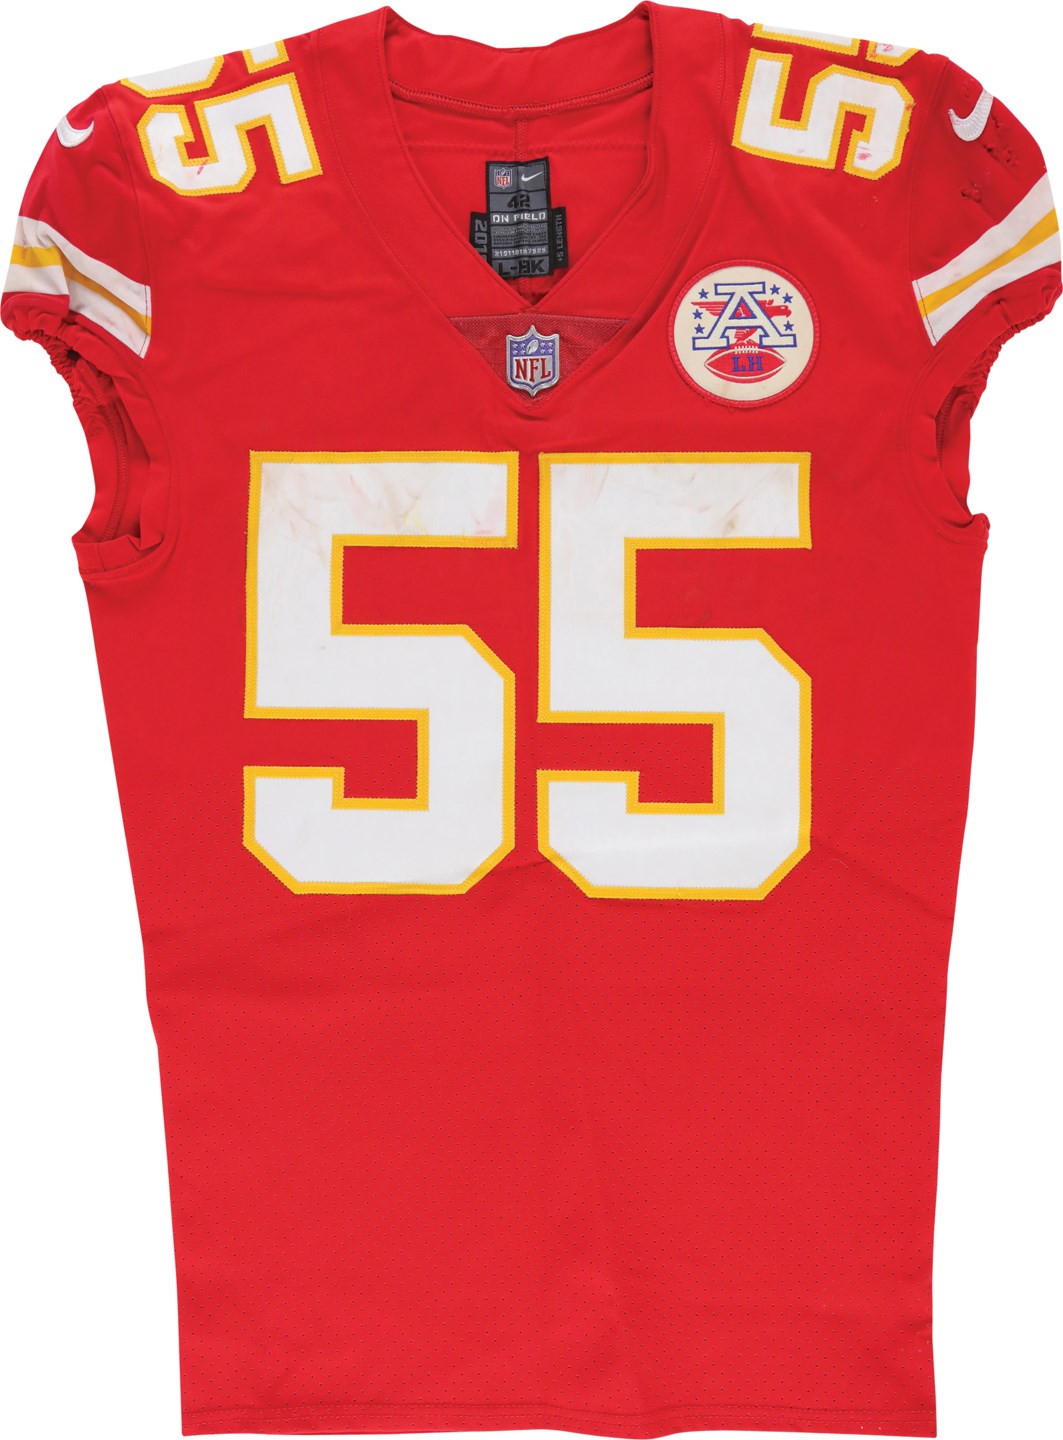 - 1/20/19 Dee Ford AFC Championship Kansas City Chiefs Unwashed Game Worn Jersey vs. New England Patriots (Photo-Matched)